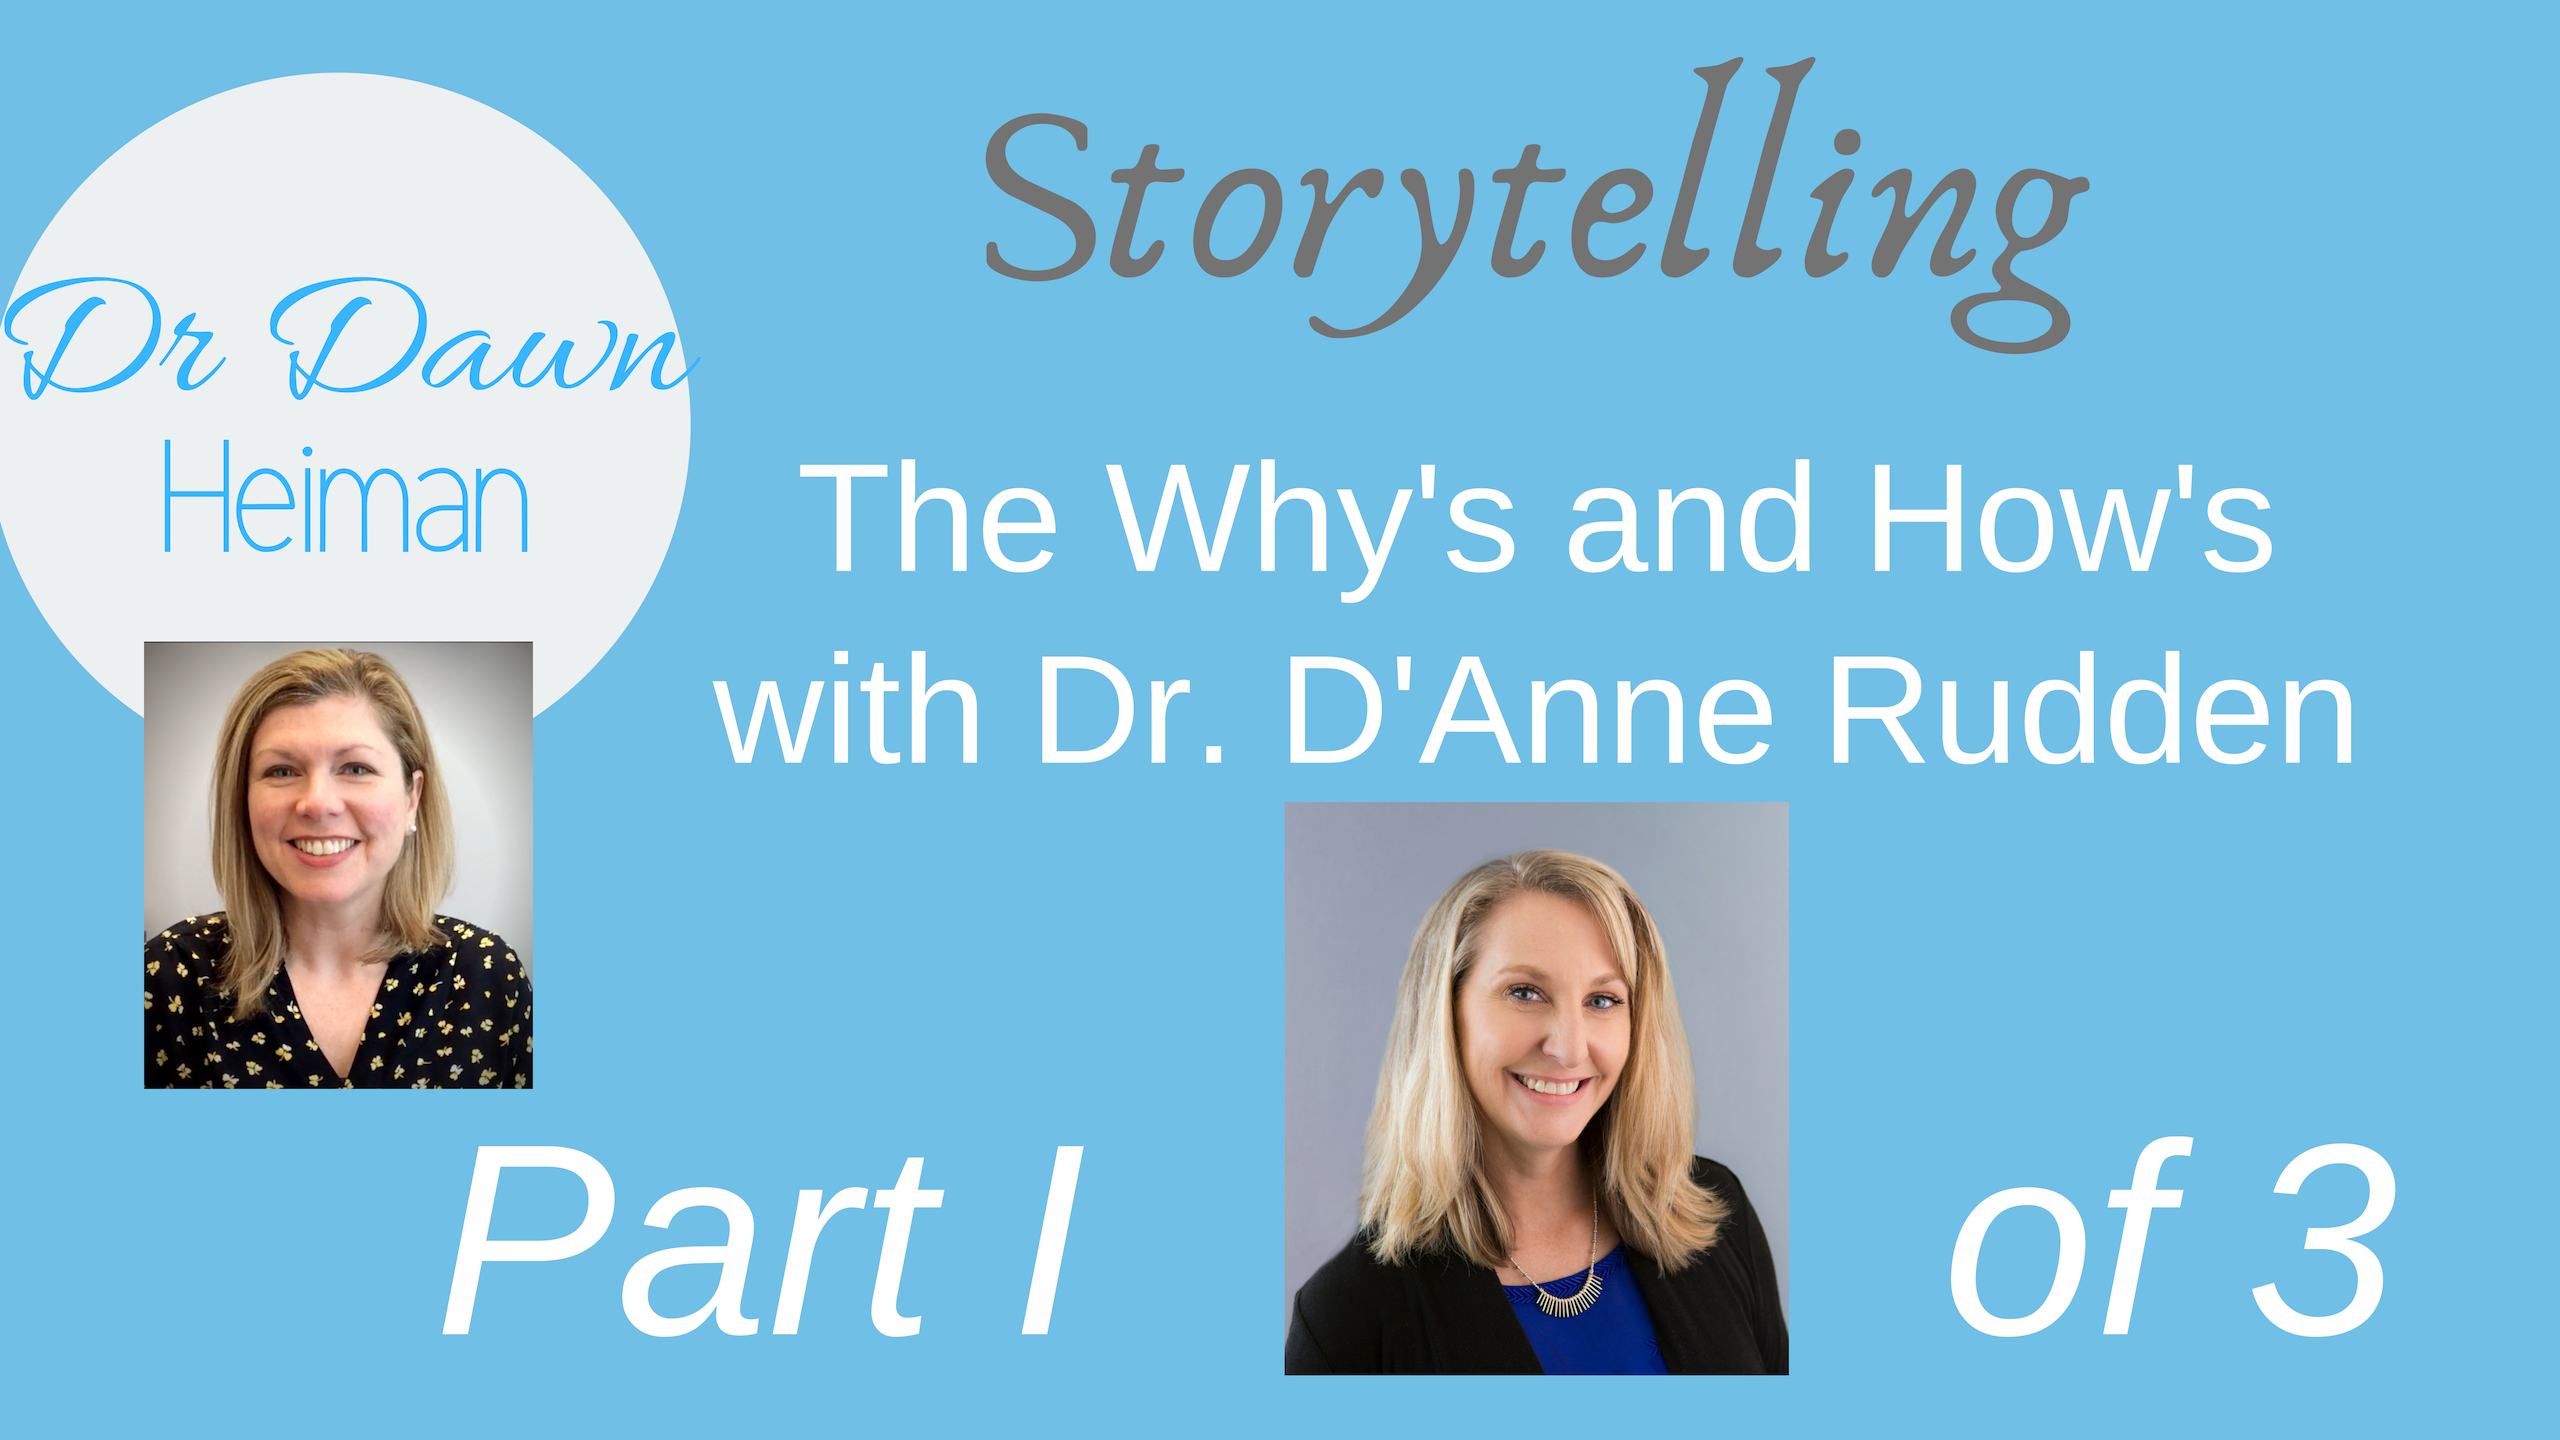 Storytelling with Dr. D’Anne Rudden